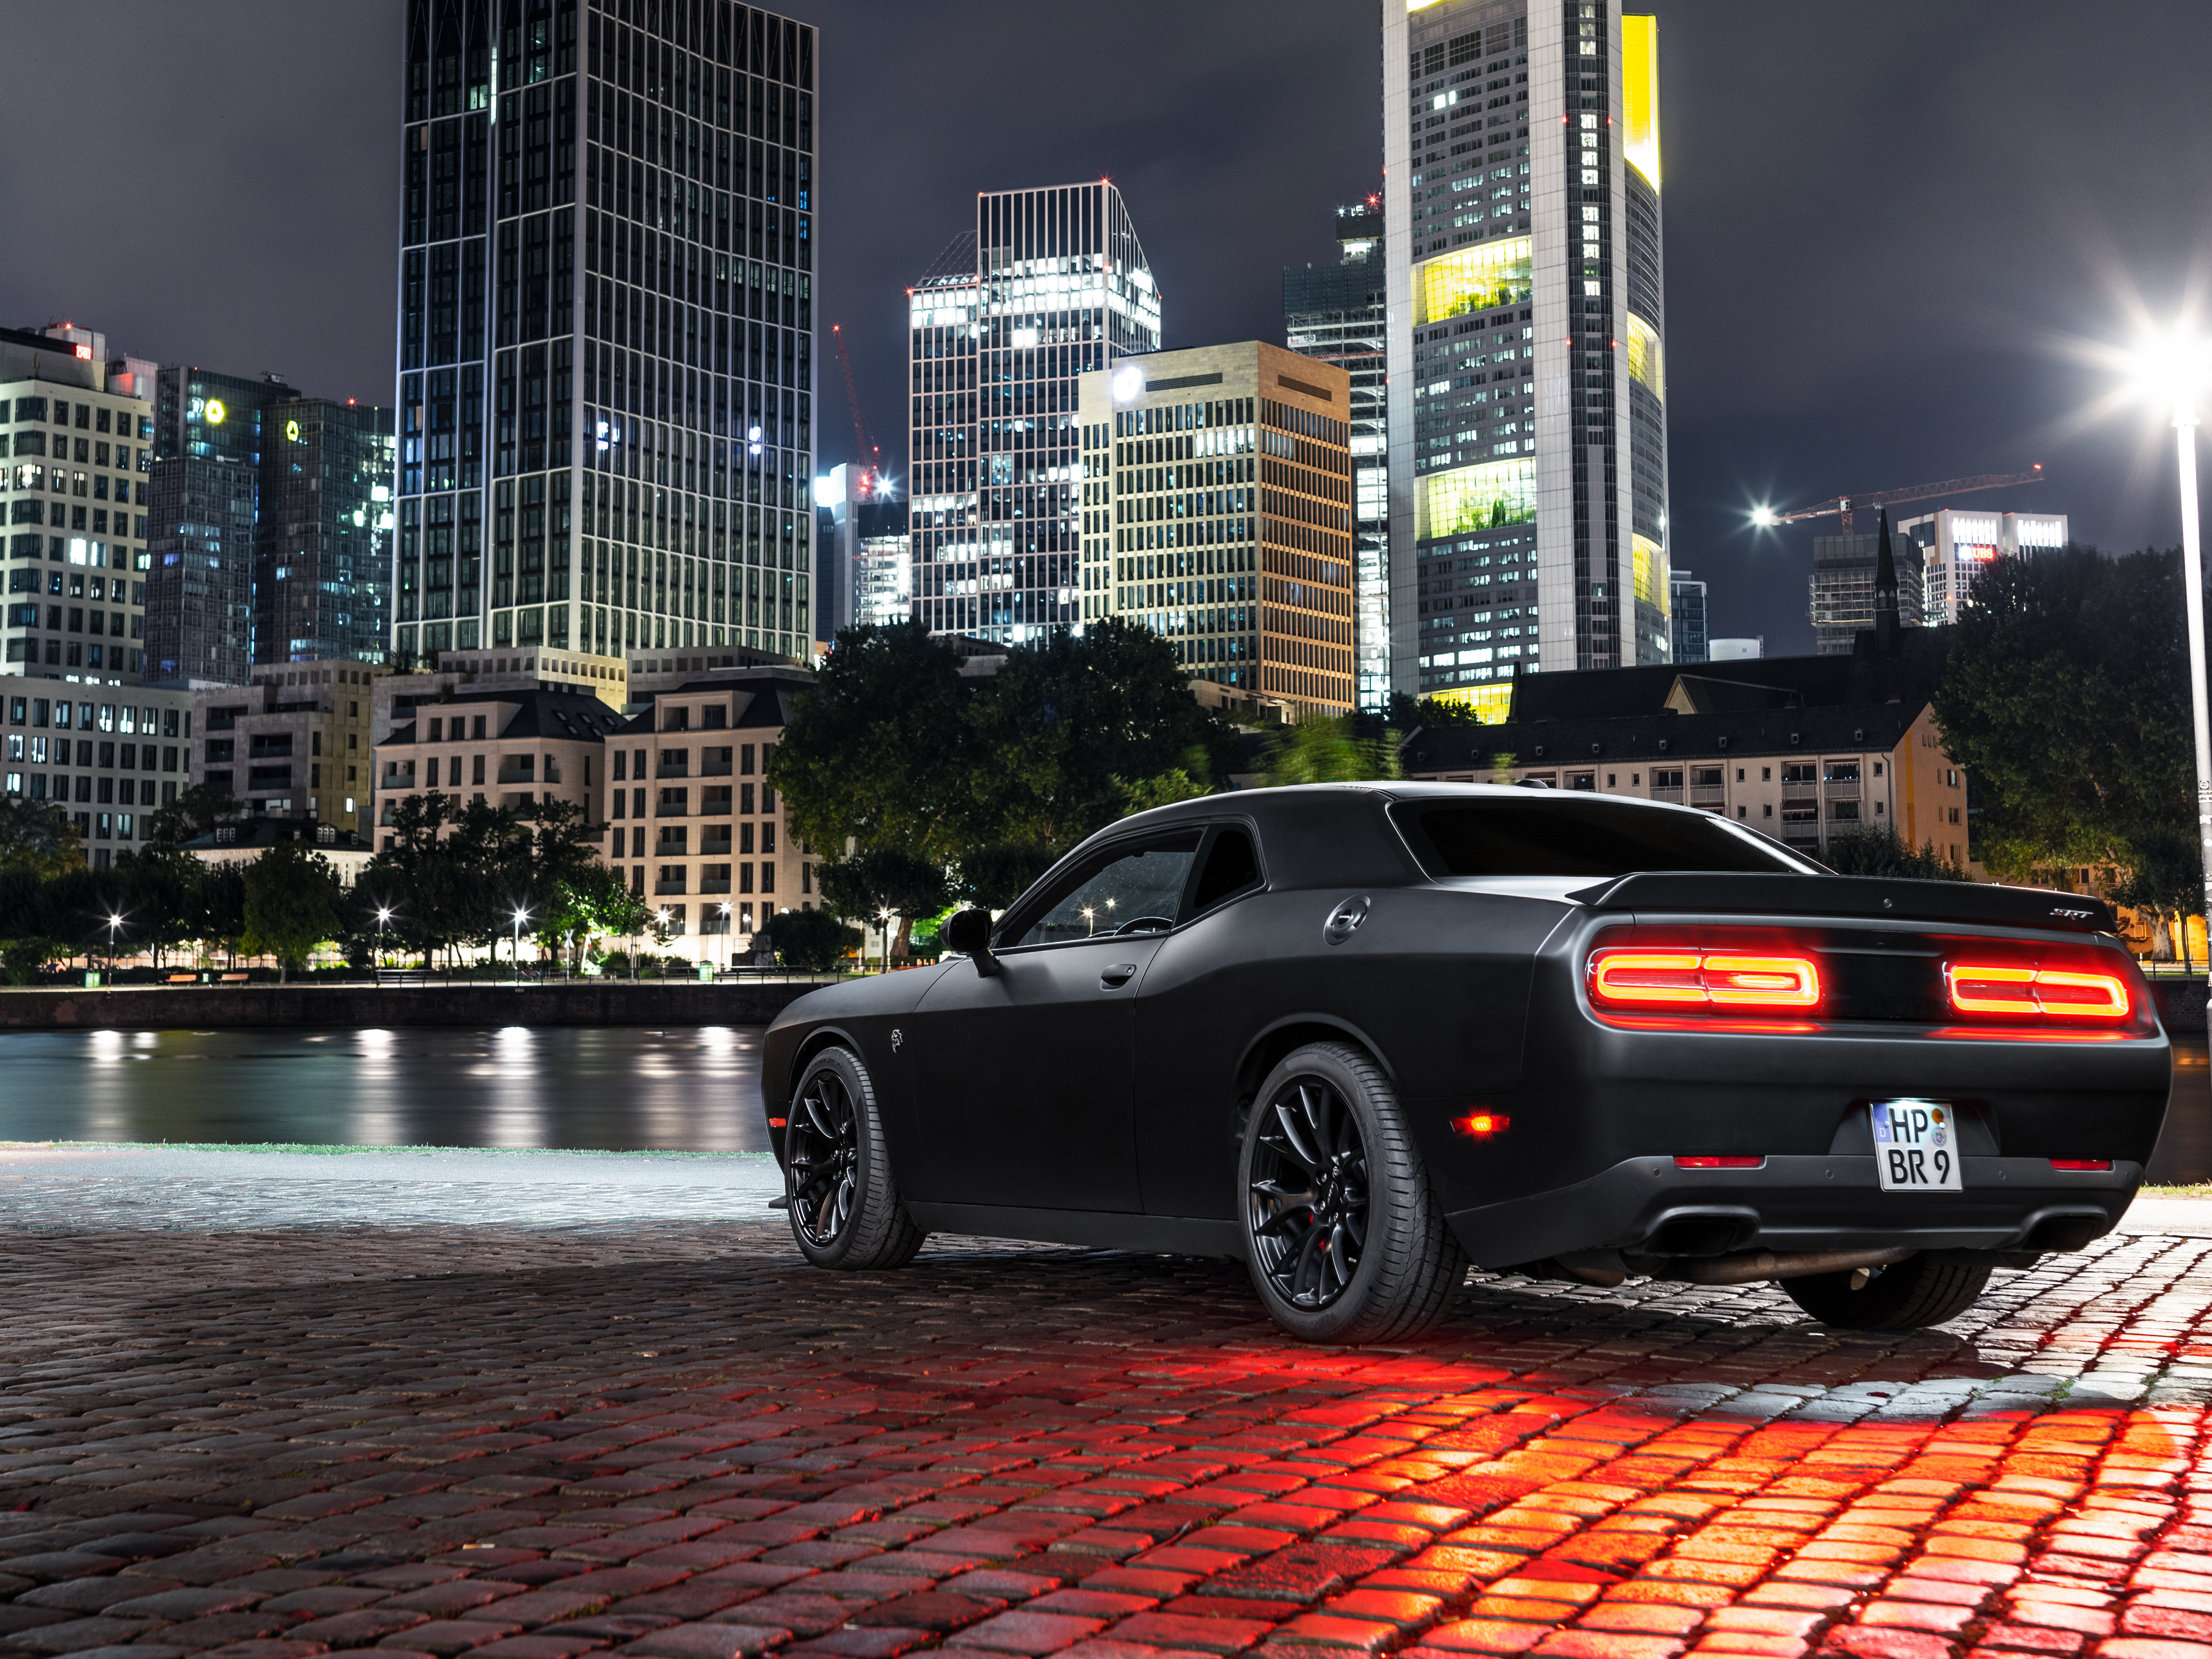 Dodge Challenger Hellcat, HD Cars, 4k Wallpapers, Images, Backgrounds